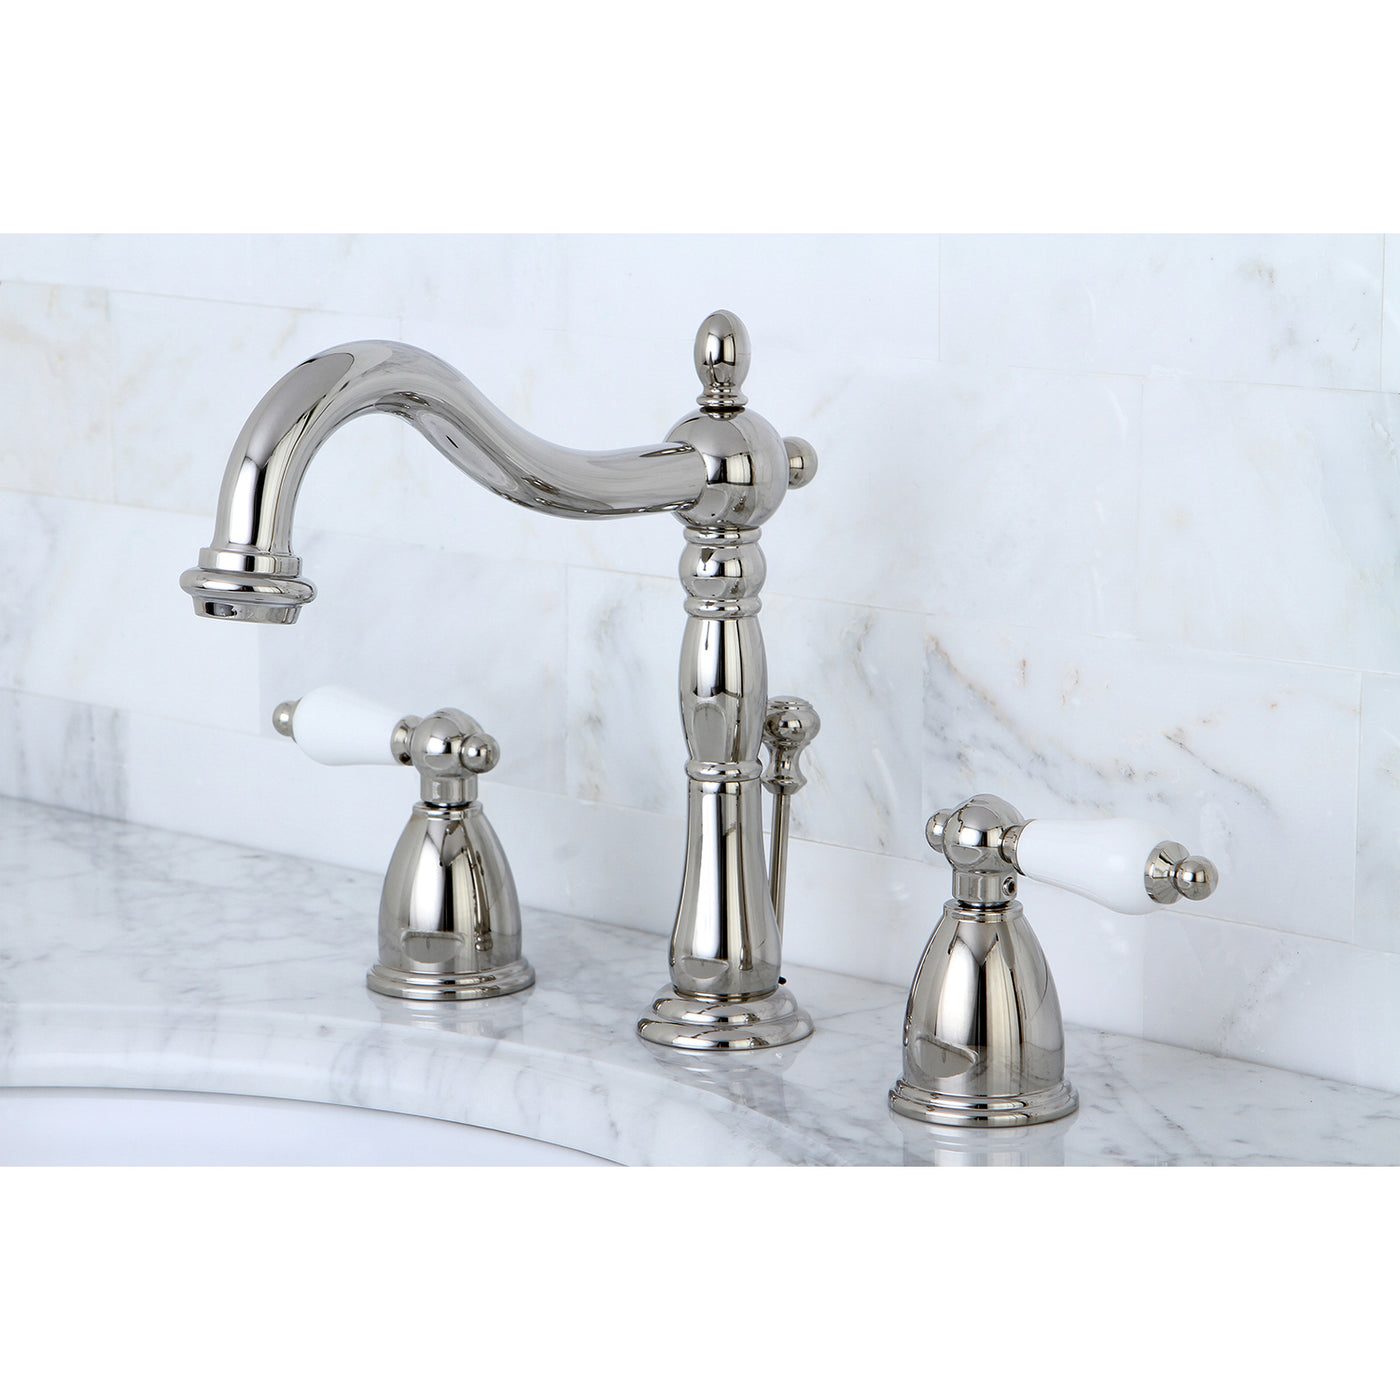 Elements of Design EB1976PL Widespread Bathroom Faucet with Brass Pop-Up, Polished Nickel